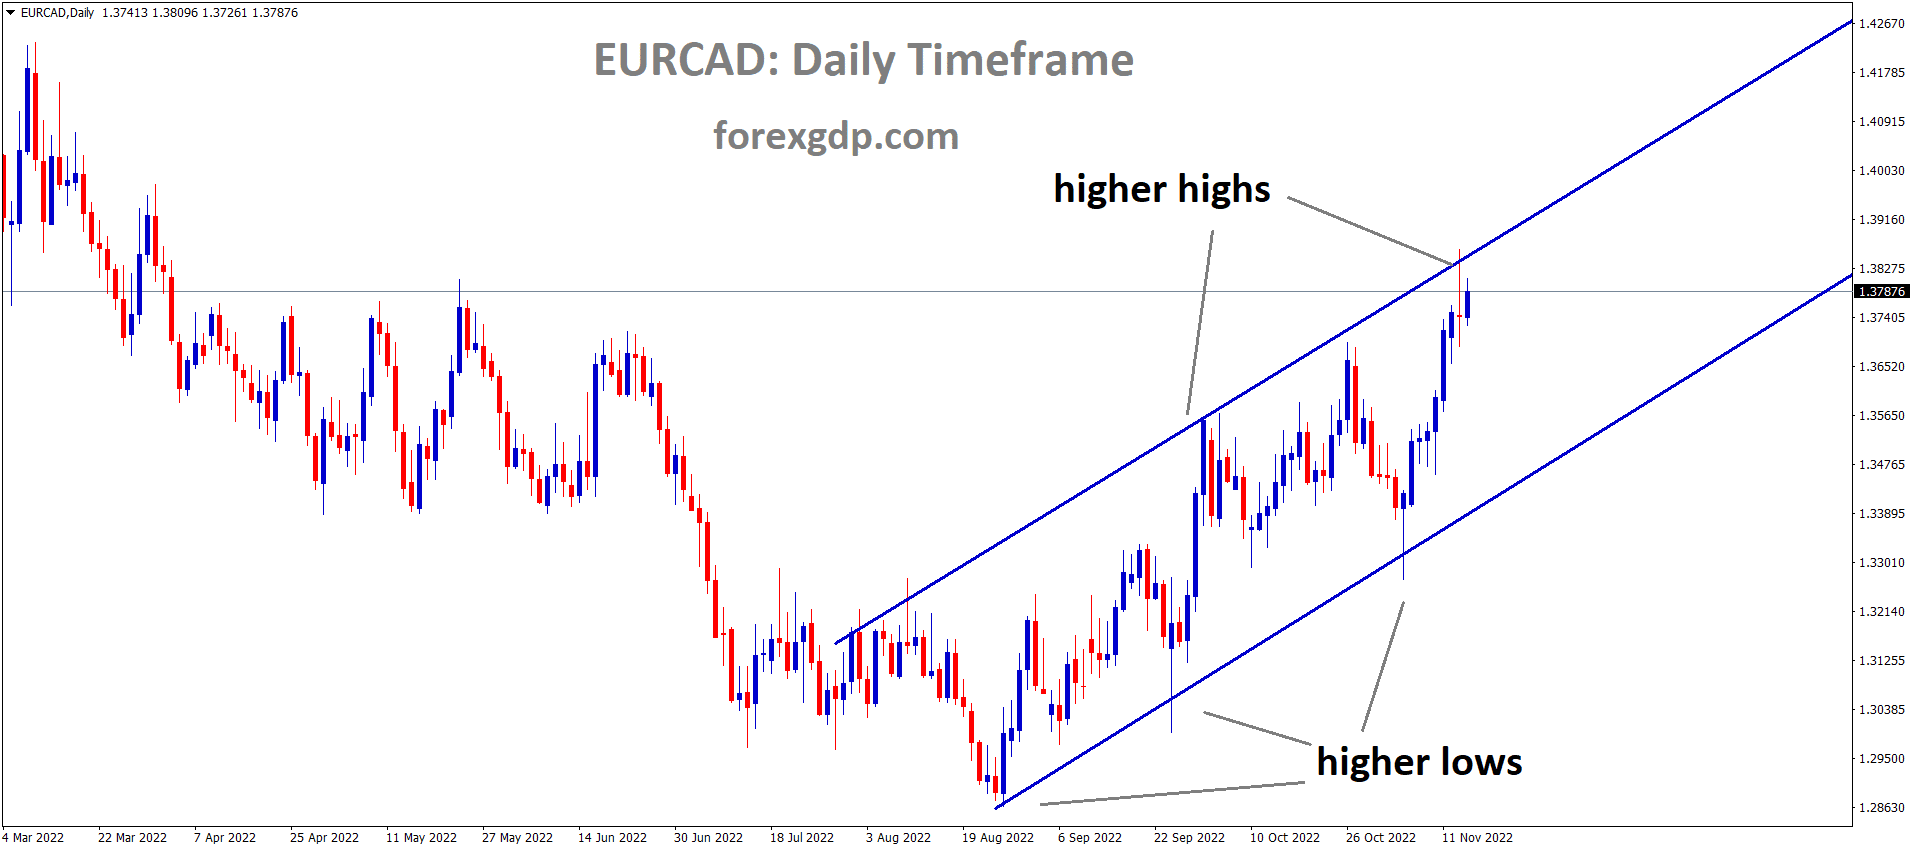 EURCAD is moving in an Ascending channel and the market has reached the higher high area of the channel